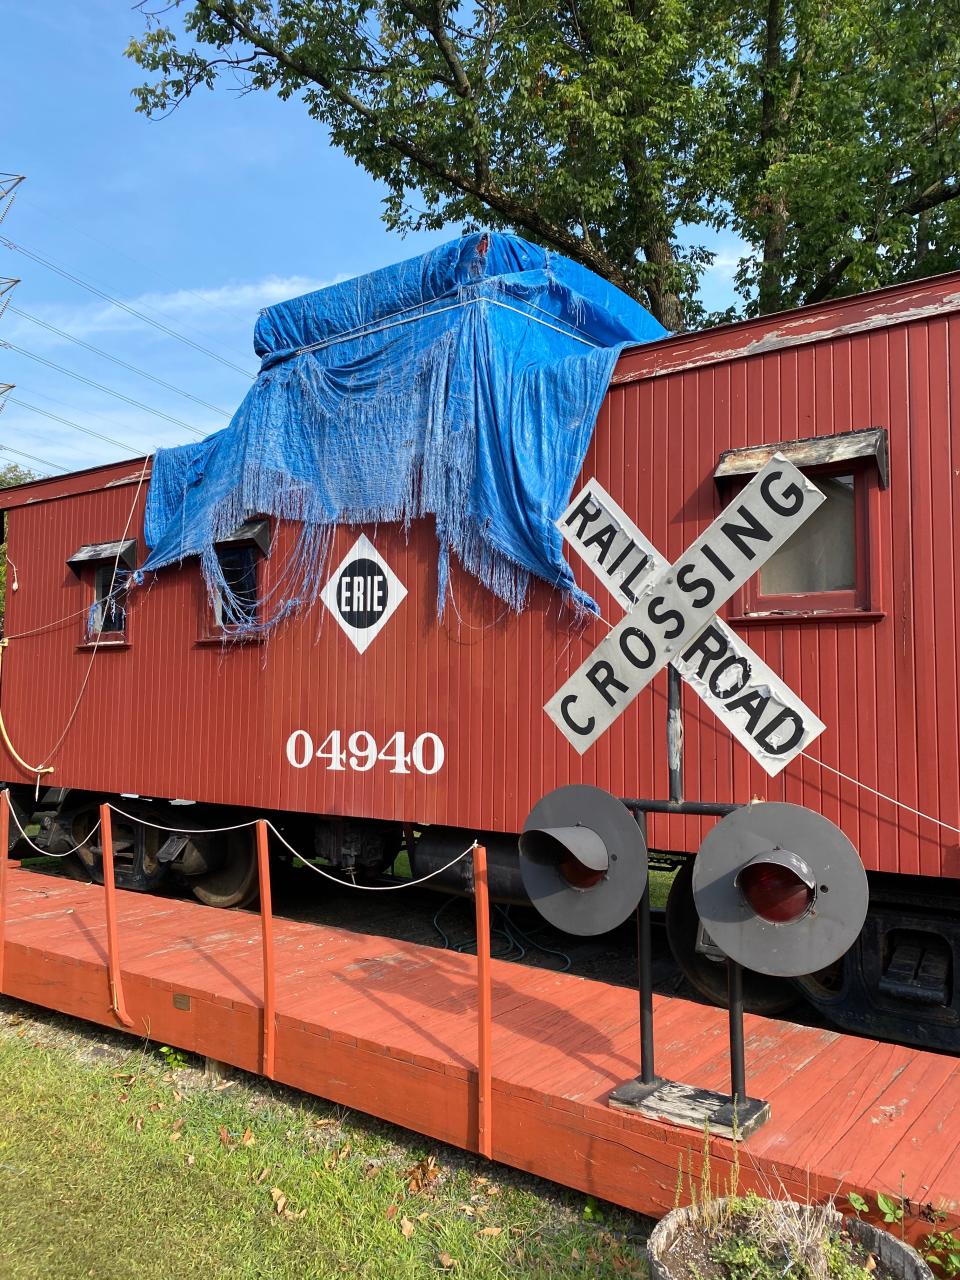 The Mahwah caboose's "cupola" through which conductors could keep an eye on the train in front of them has sustained water damage and is now covered with a tarp.